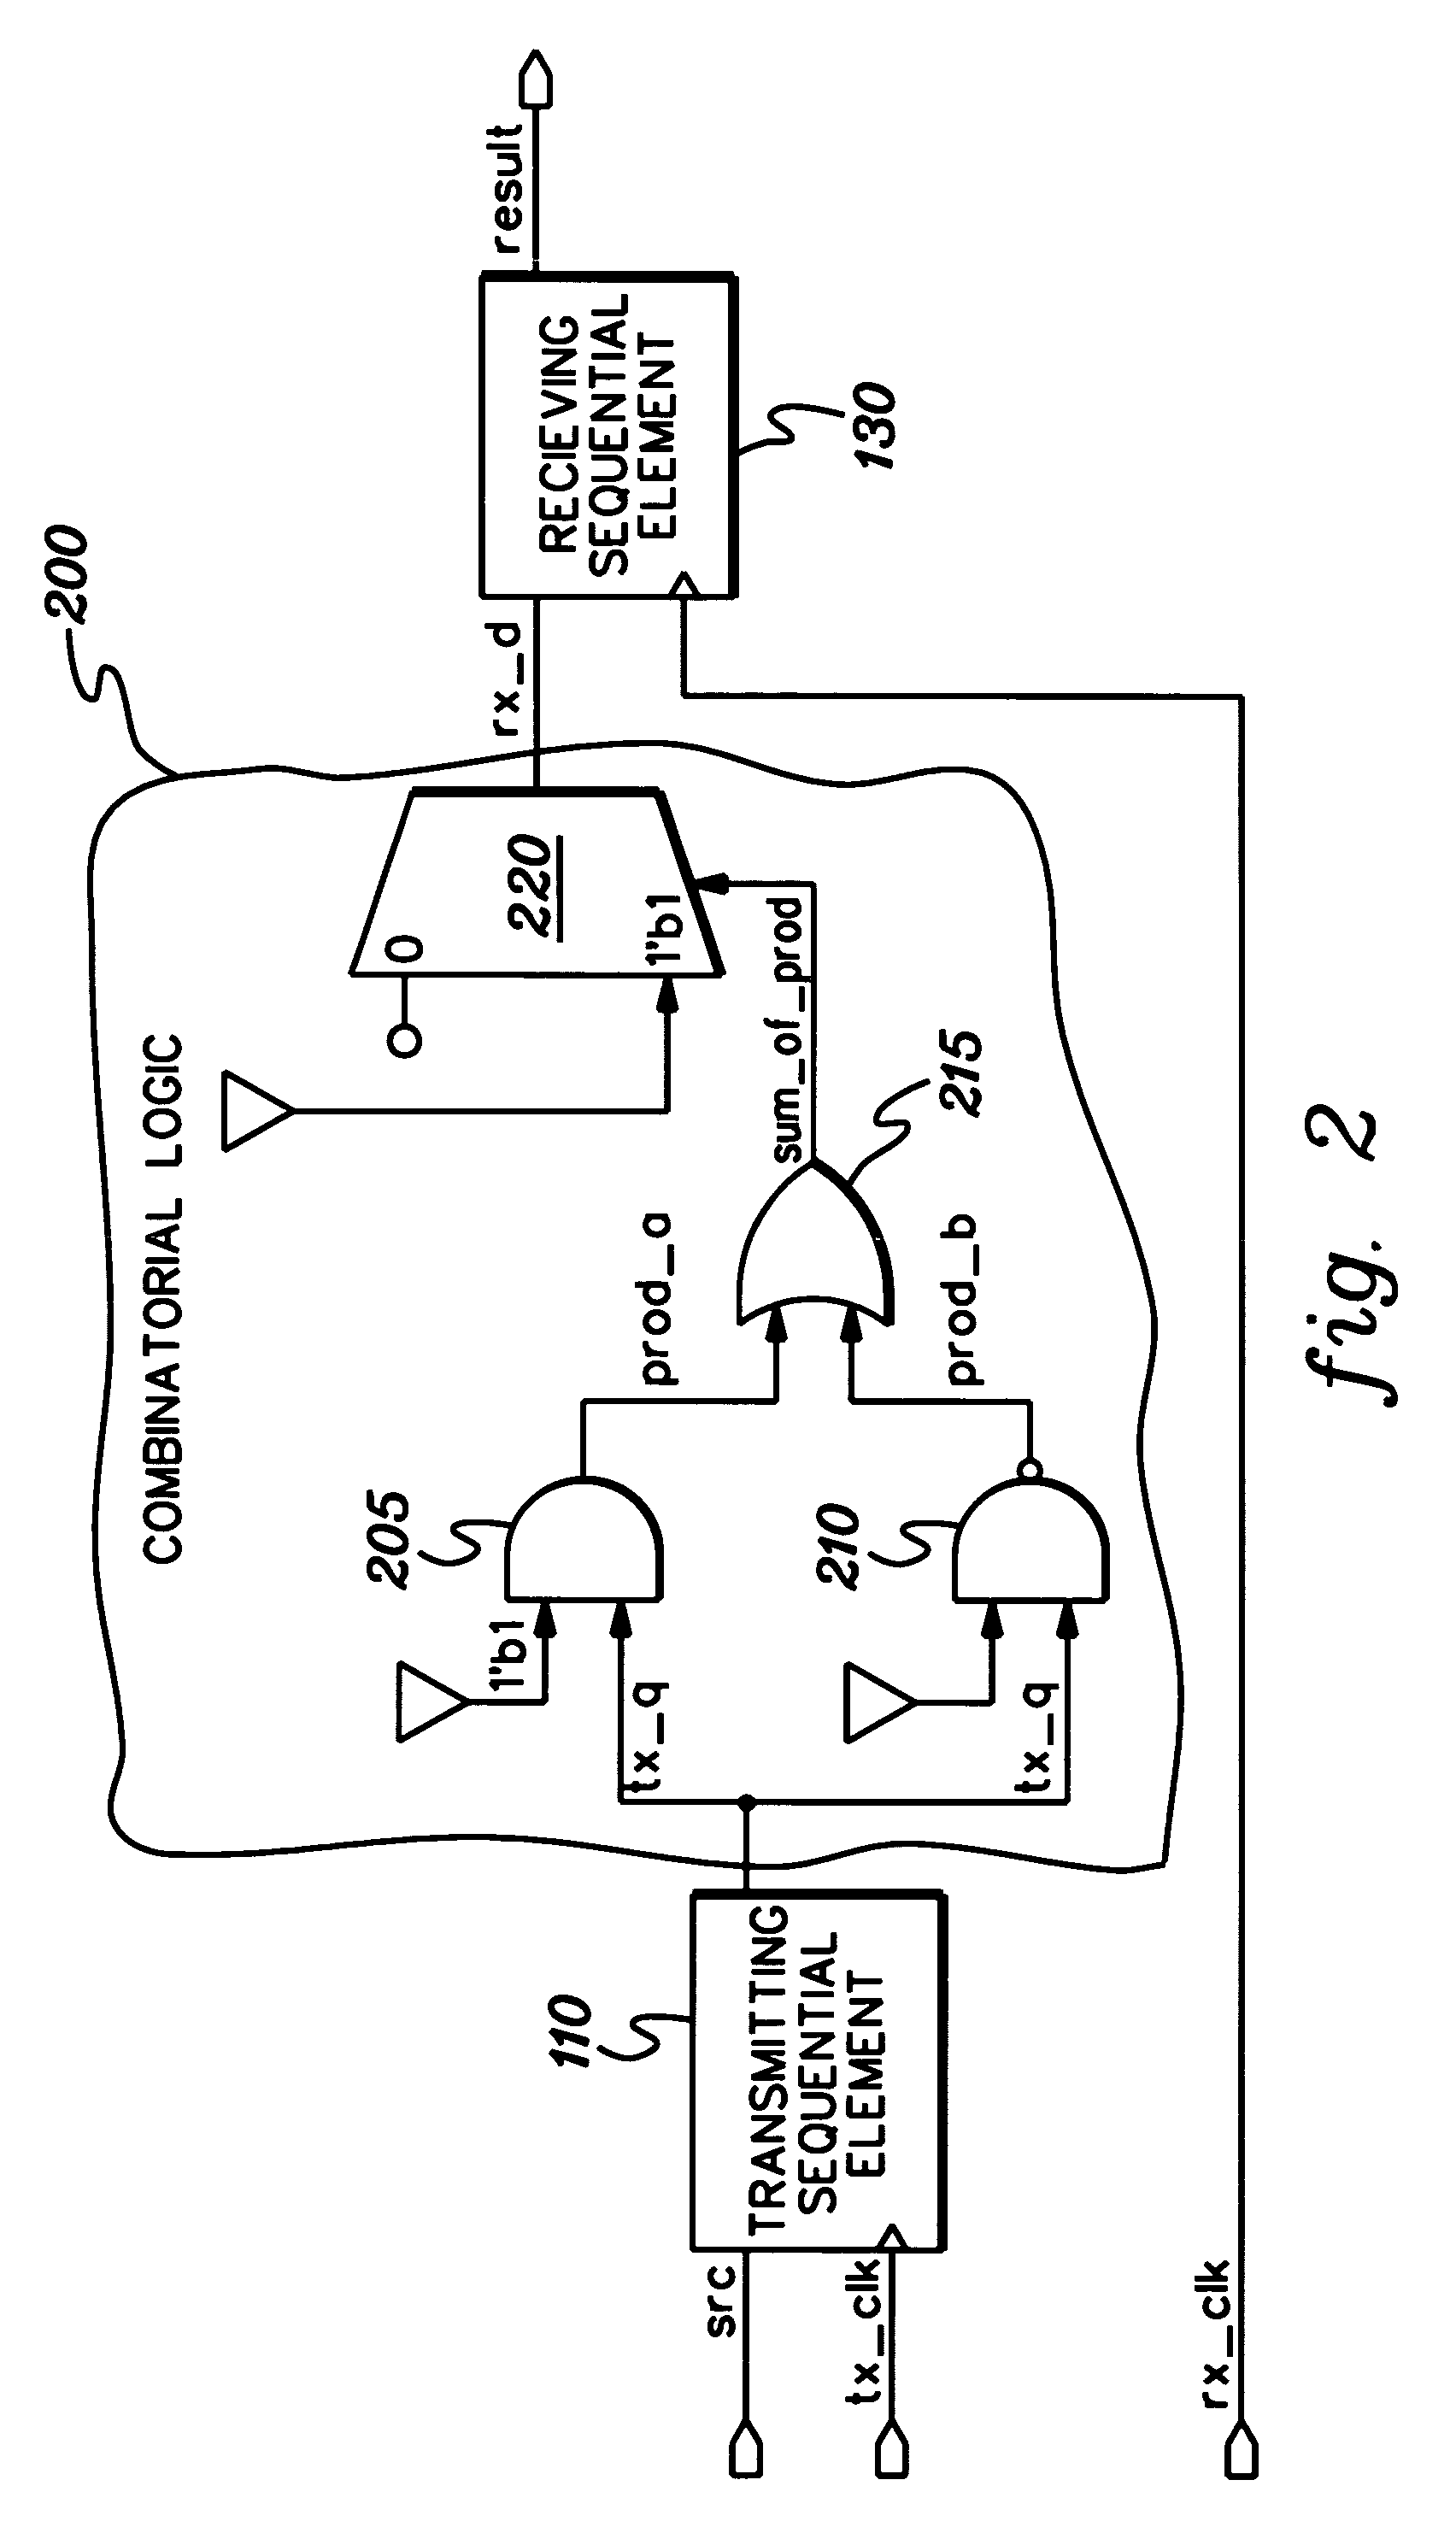 Method, apparatus, and computer program product for facilitating modeling of a combinatorial logic glitch at an asynchronous clock domain crossing